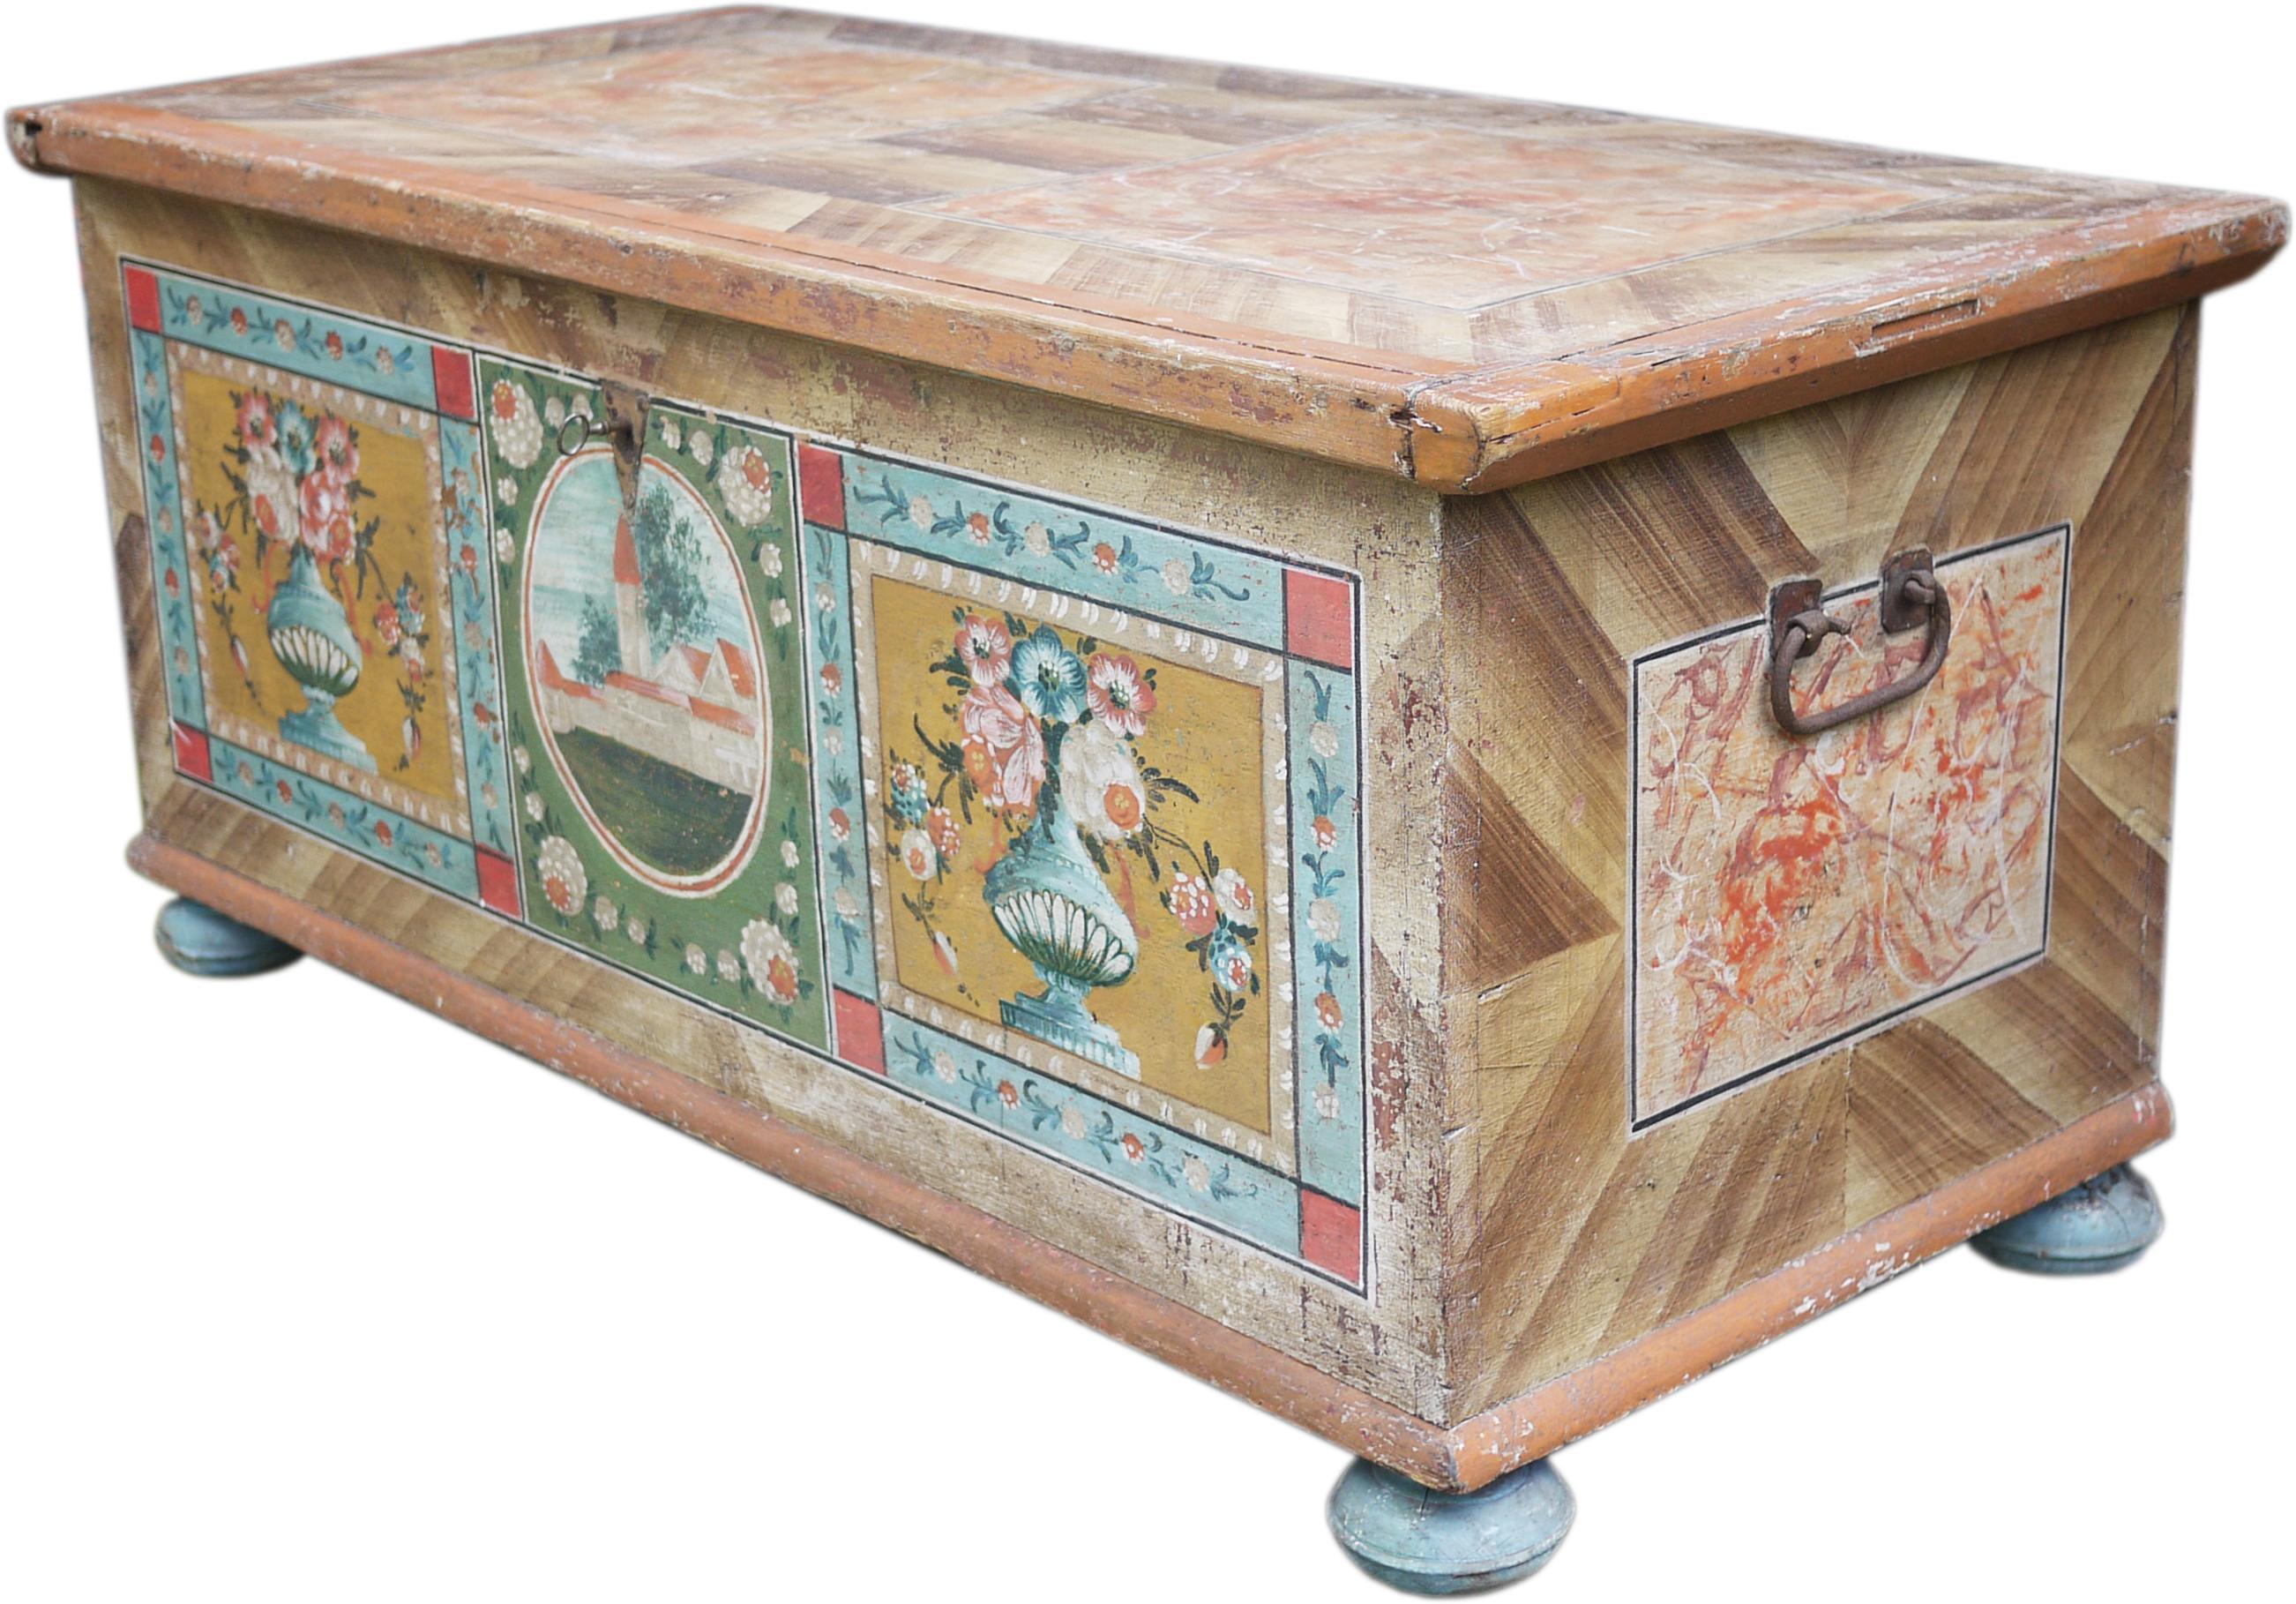 Measures: 
H.64, L. 144, P. 66
H. 25.2 in, W. 56.7 in, D. 26 in

Antique painted chest, partially restored. The background is decorated in faux wood, reproducing a herringbone pattern in four stages. On the front two side panels contain rich